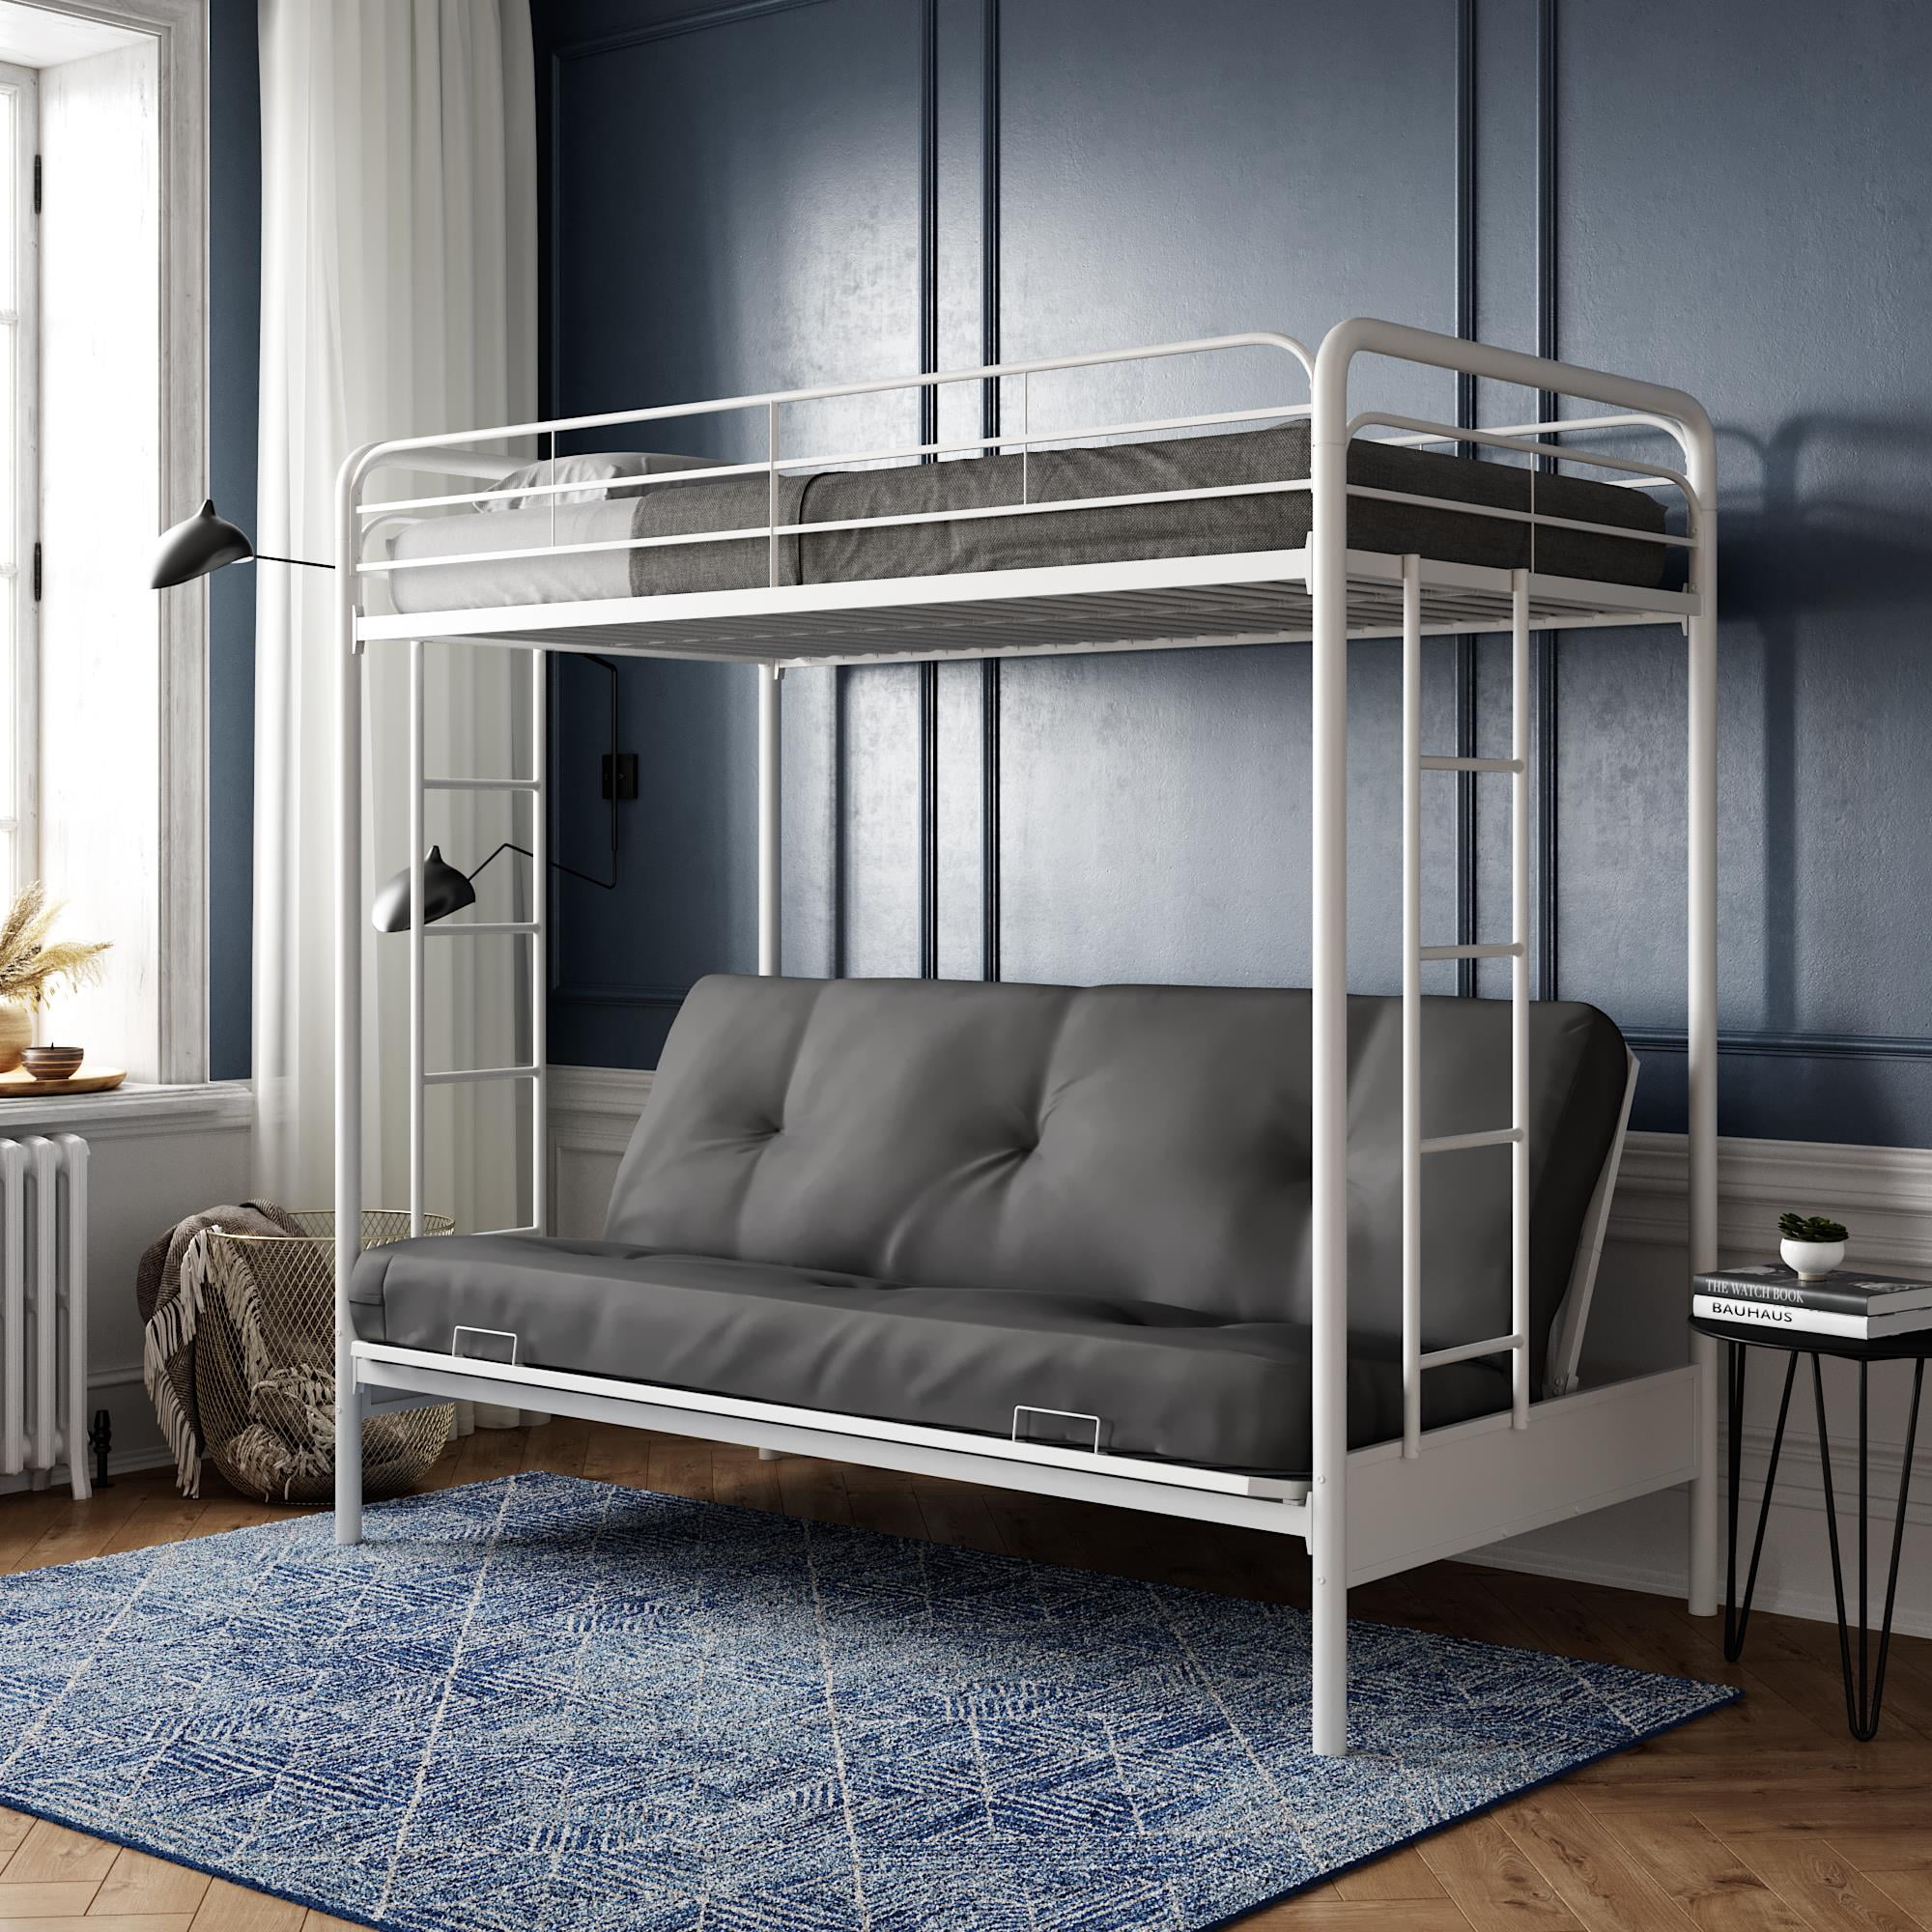 Dhp Twin Over Futon Metal Bunk Bed, Bunk Bed And Futon